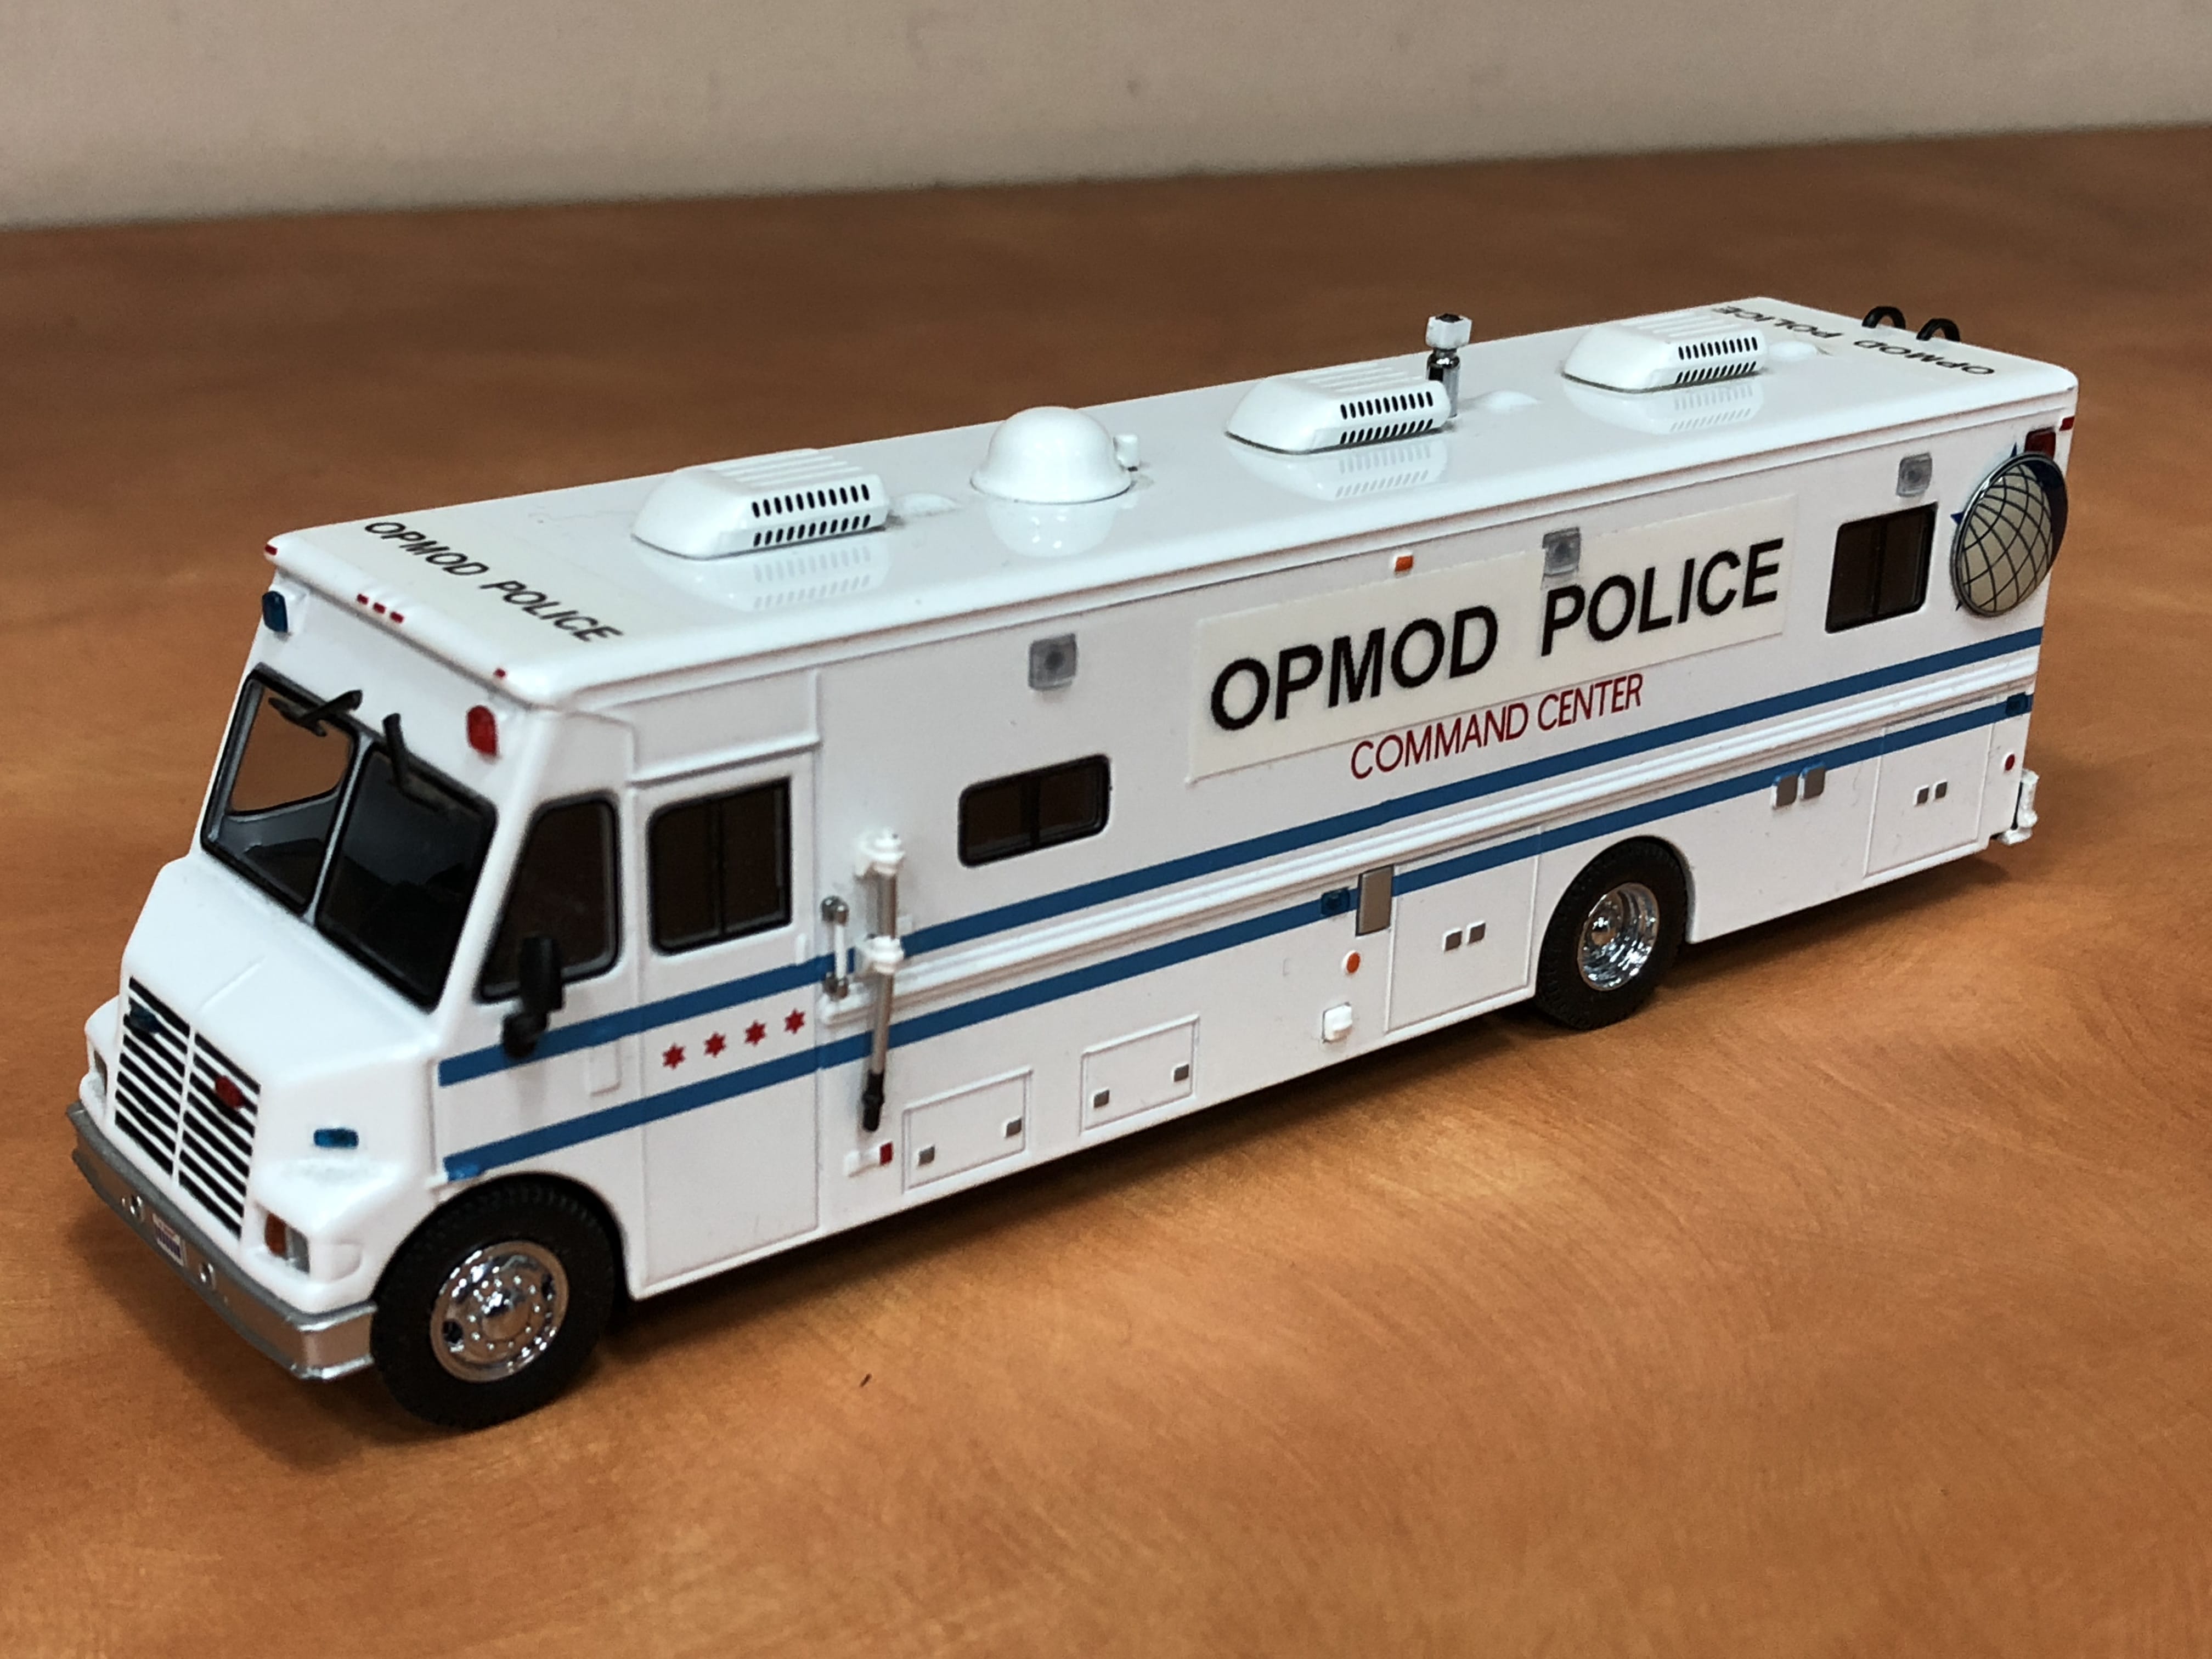 OPMOD Police Command Center